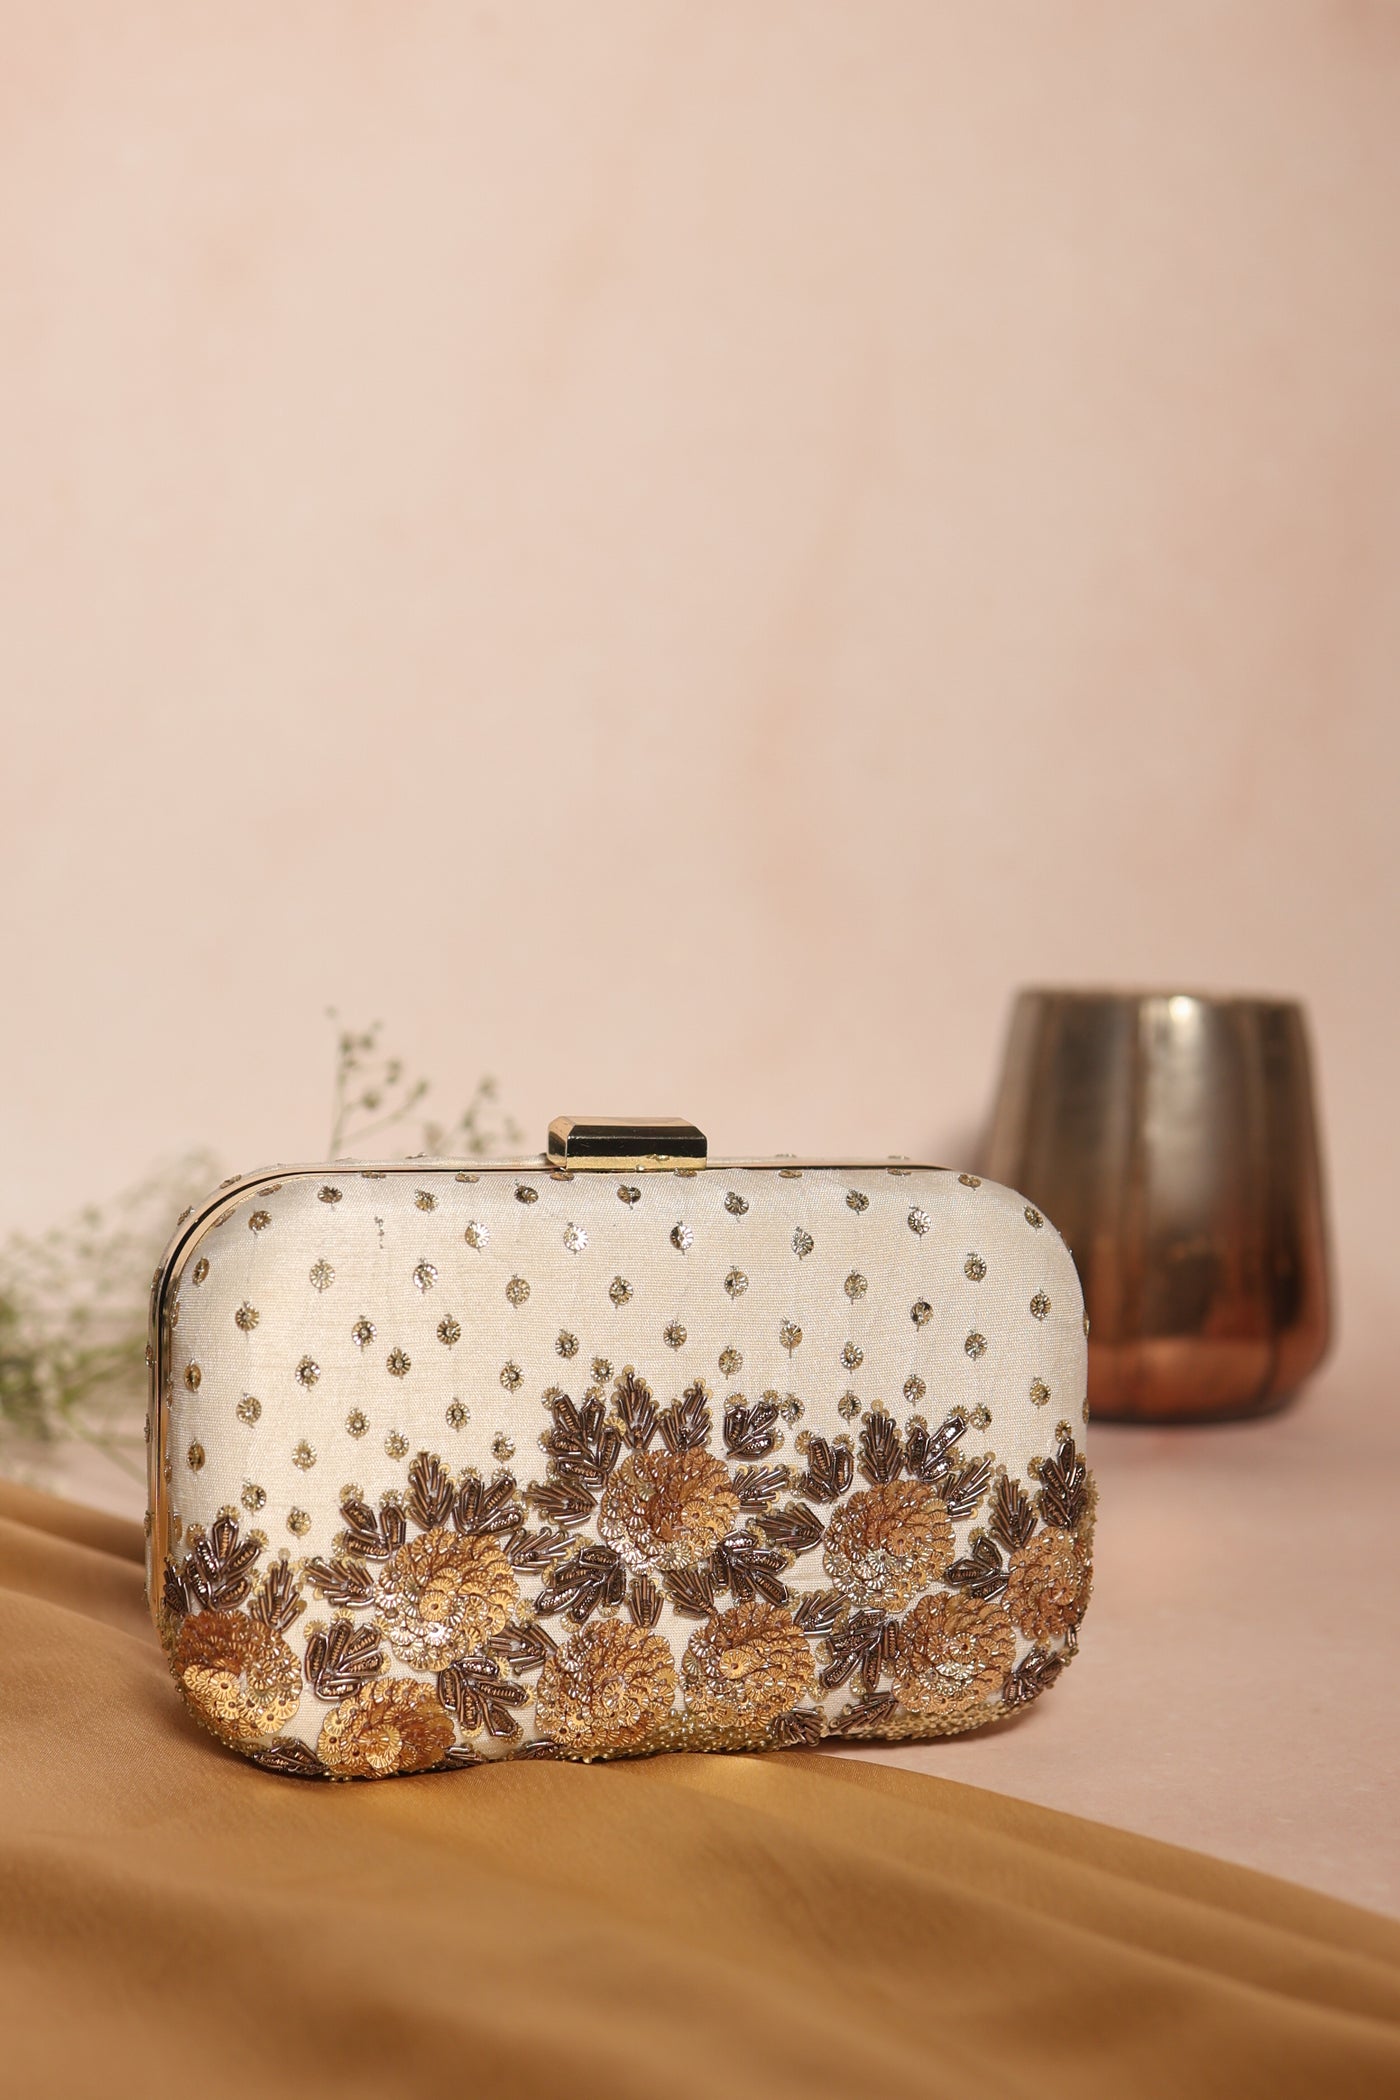 Ivory Blossom Clutch